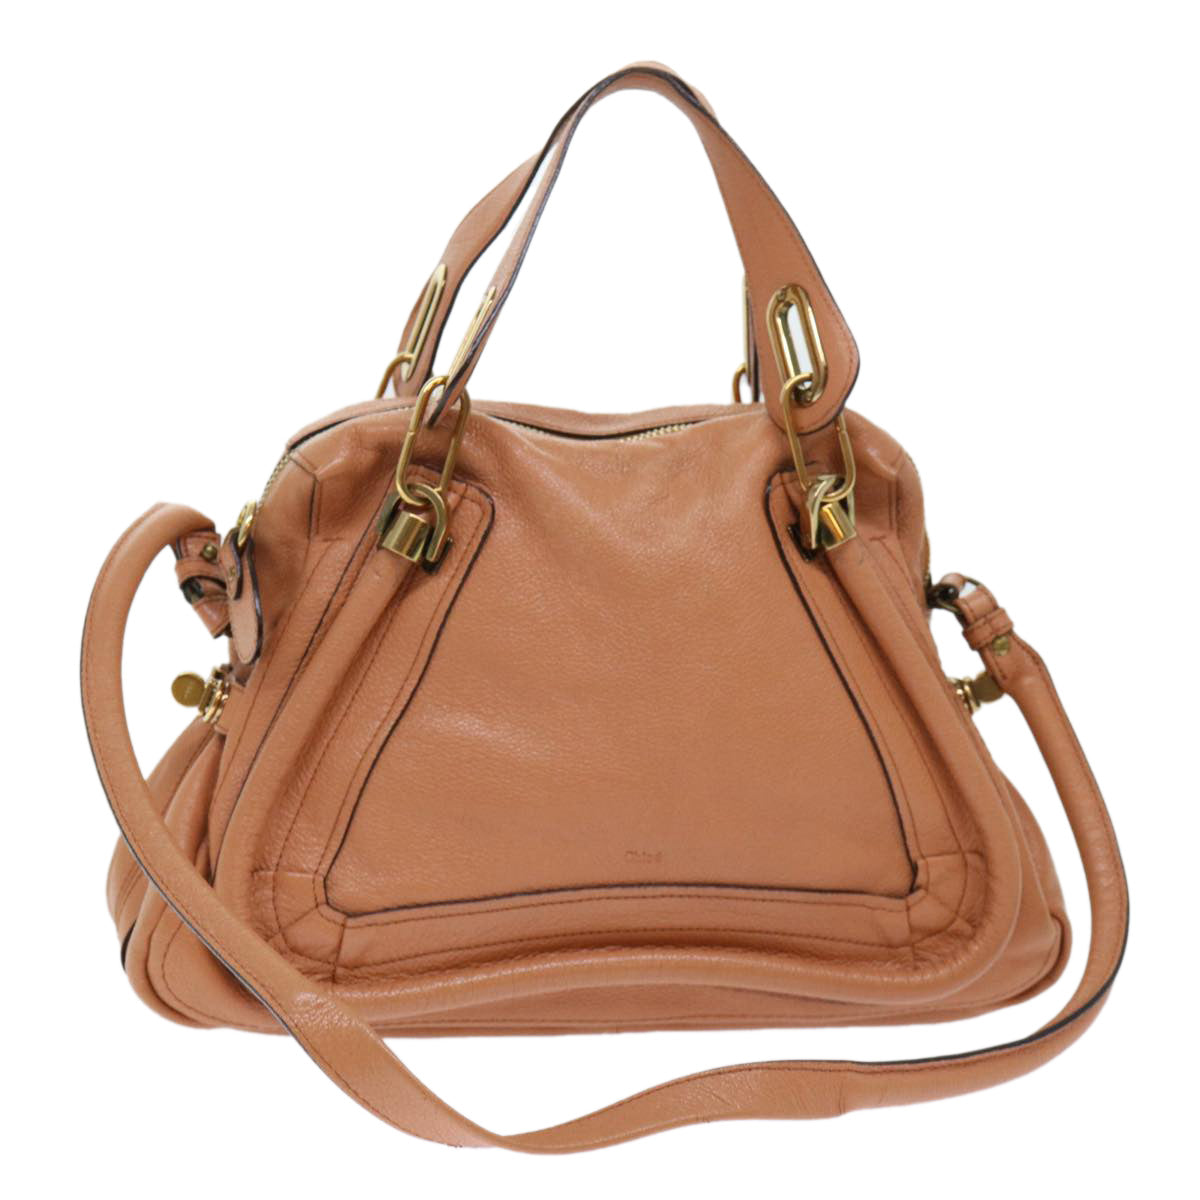 Chloe Paraty Hand Bag Leather 2way Brown 02-11-50 Auth am4850